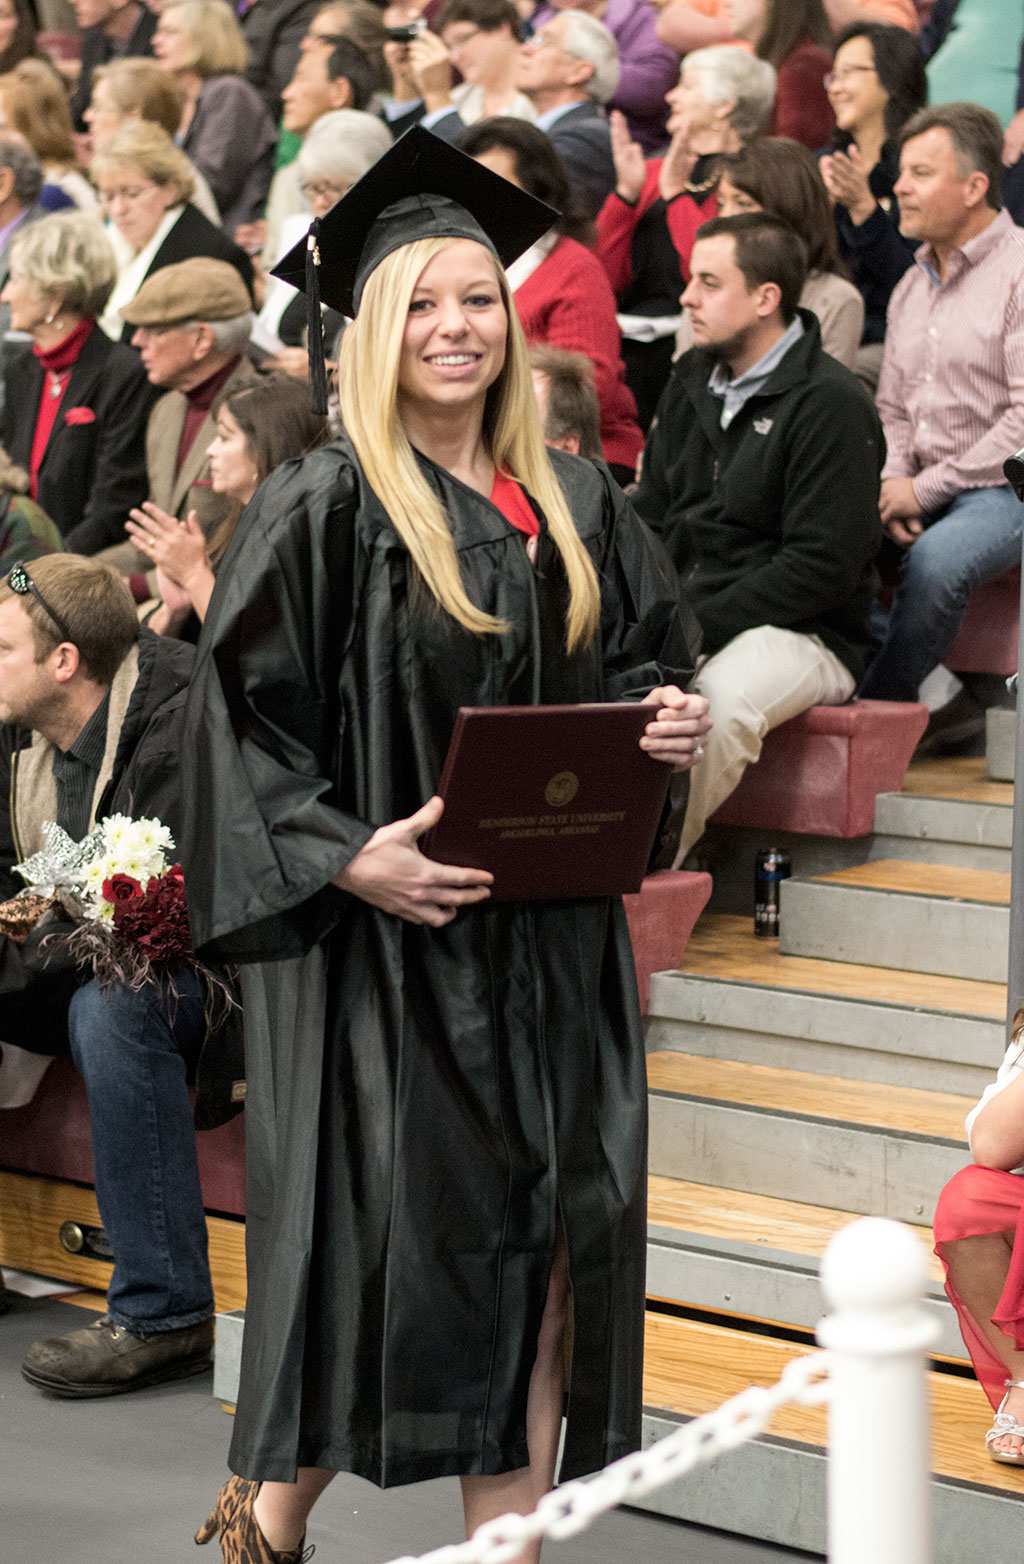 Jodi stands in line to have her portrait taken shortly after “walking” at HSU’s 2015 fall commencement ceremony on Dec. 18, 2015.